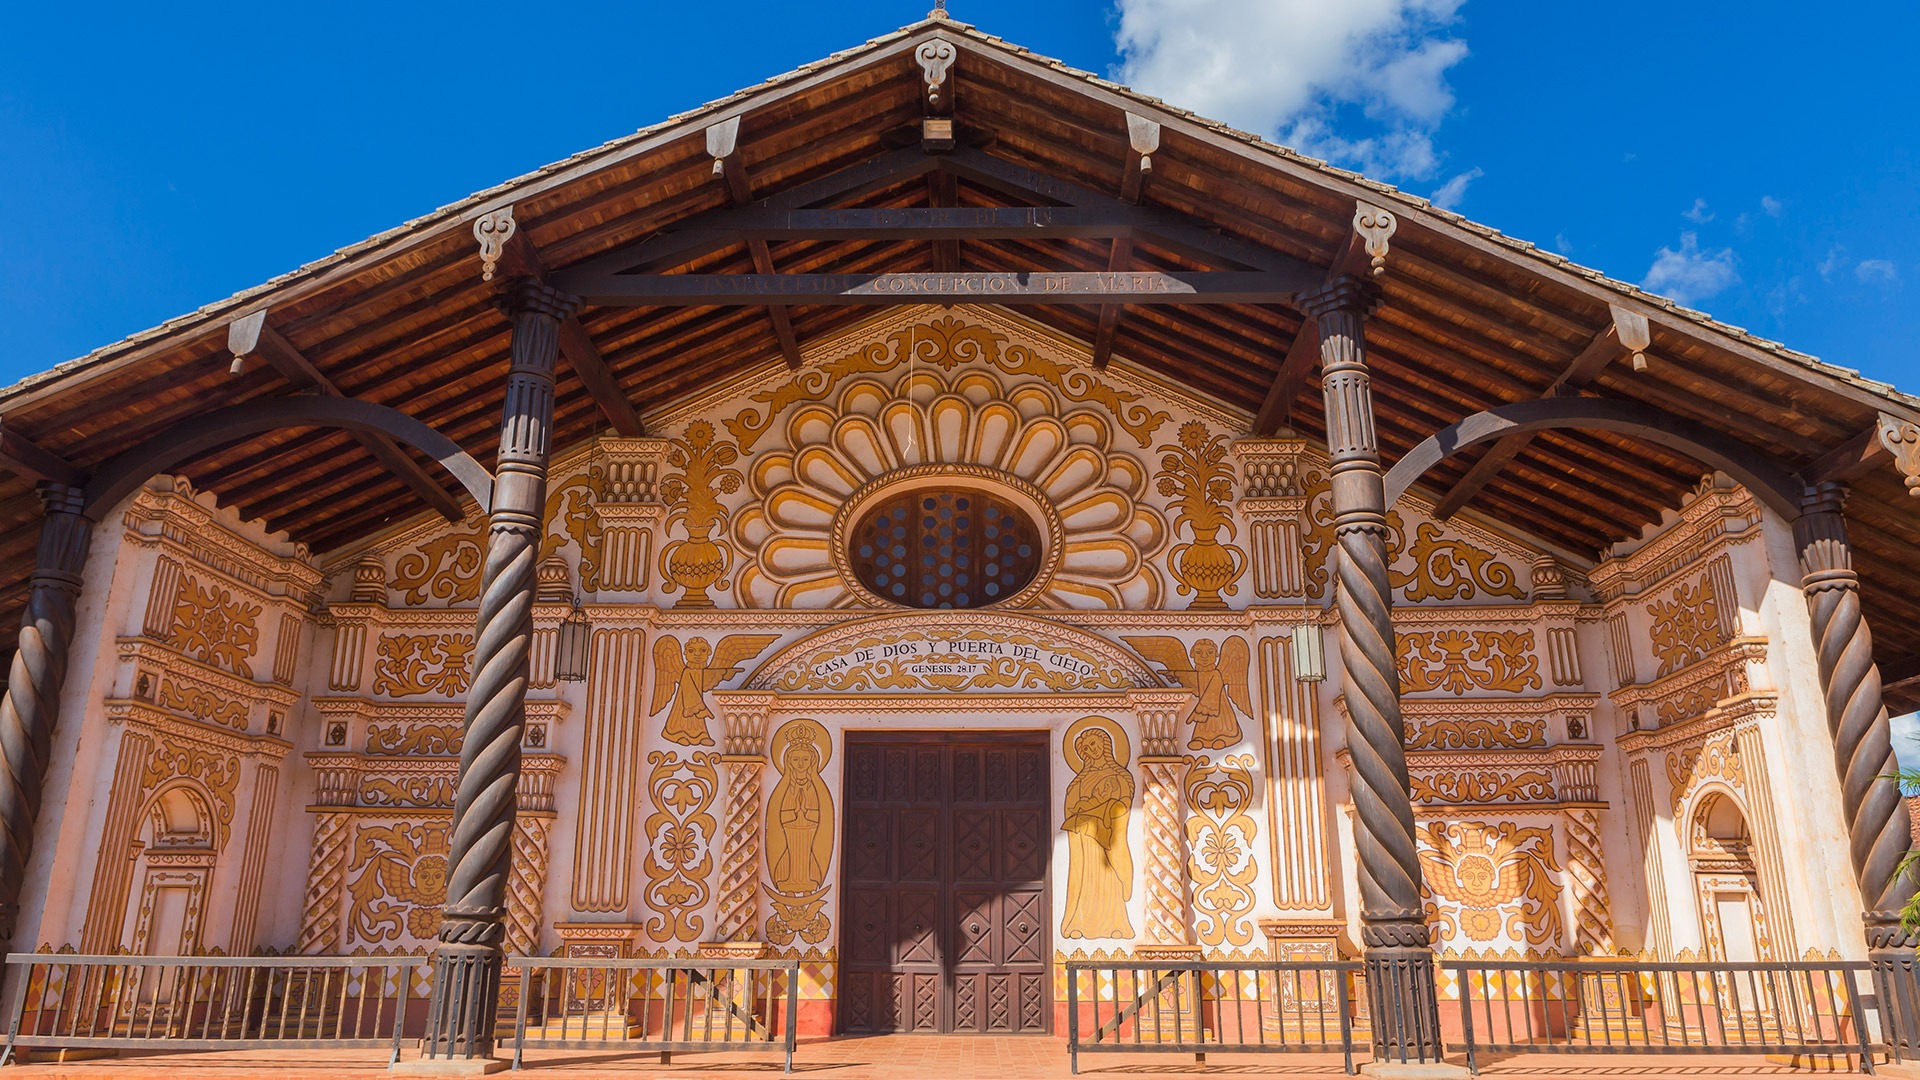 The ornate facade of a Jesuit Mission in Chiquitos, Bolivia